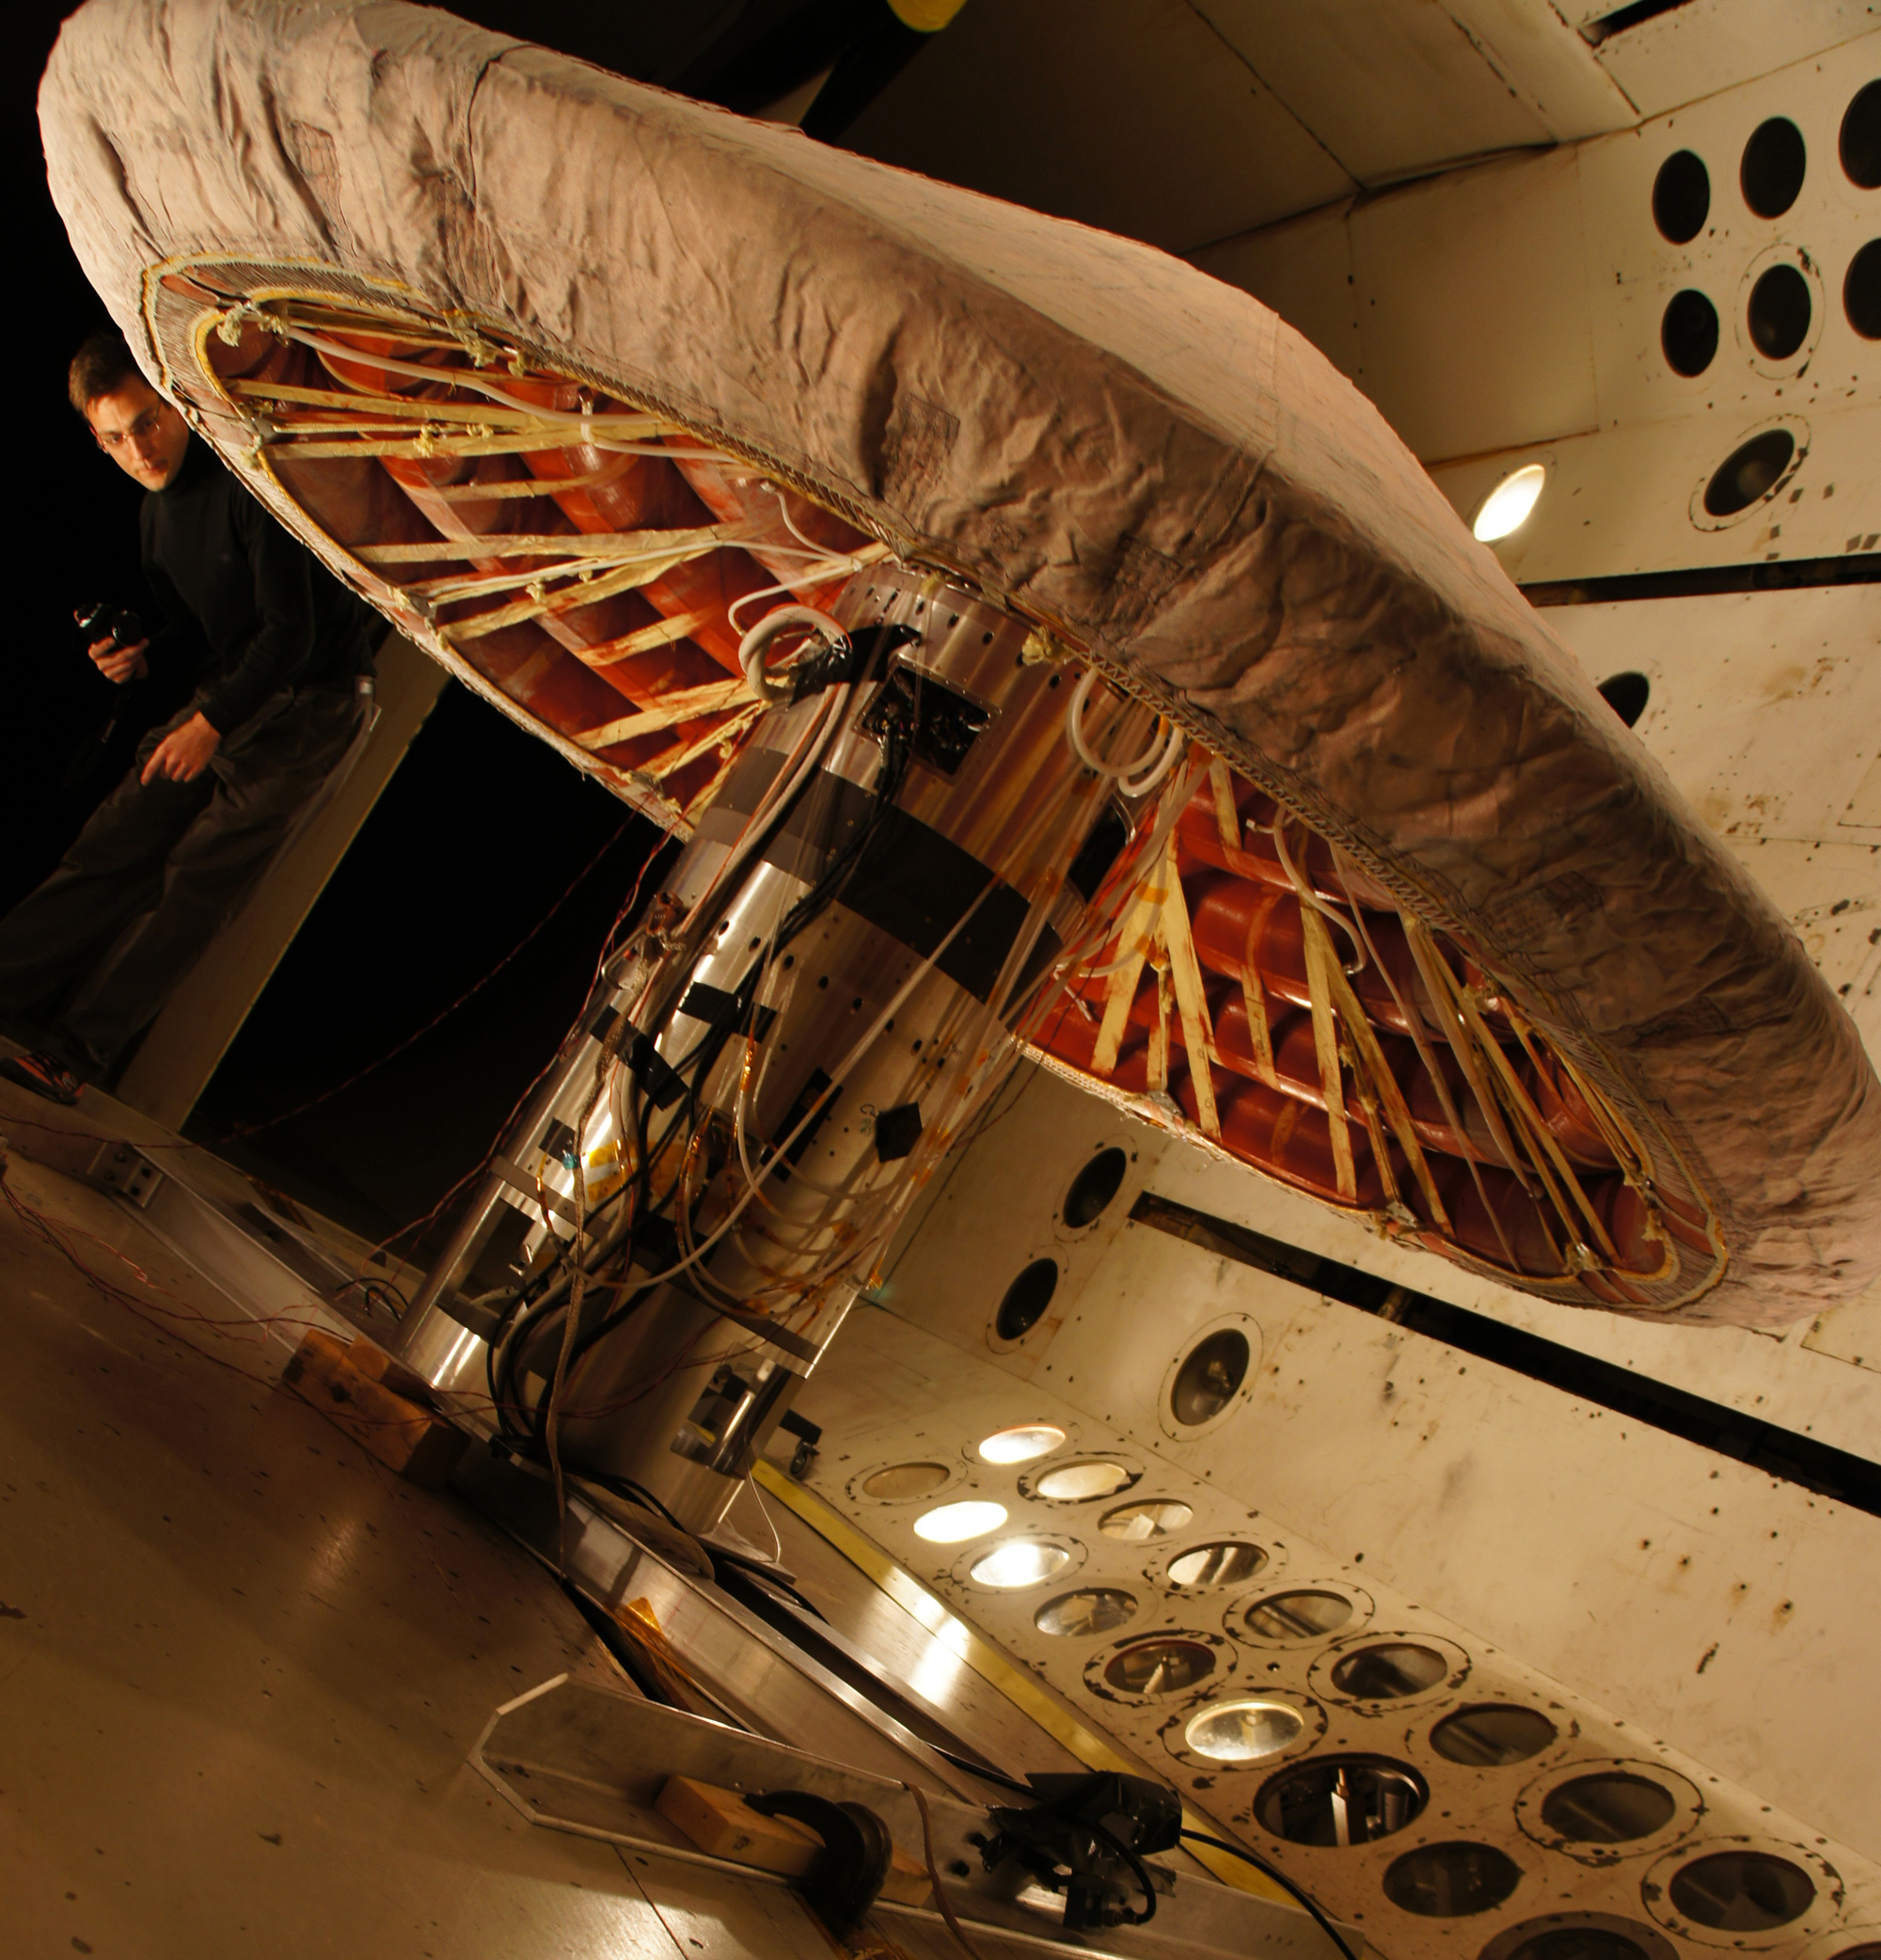 NASA Successfully Tests its Inflatable Heat Shield in Reentry